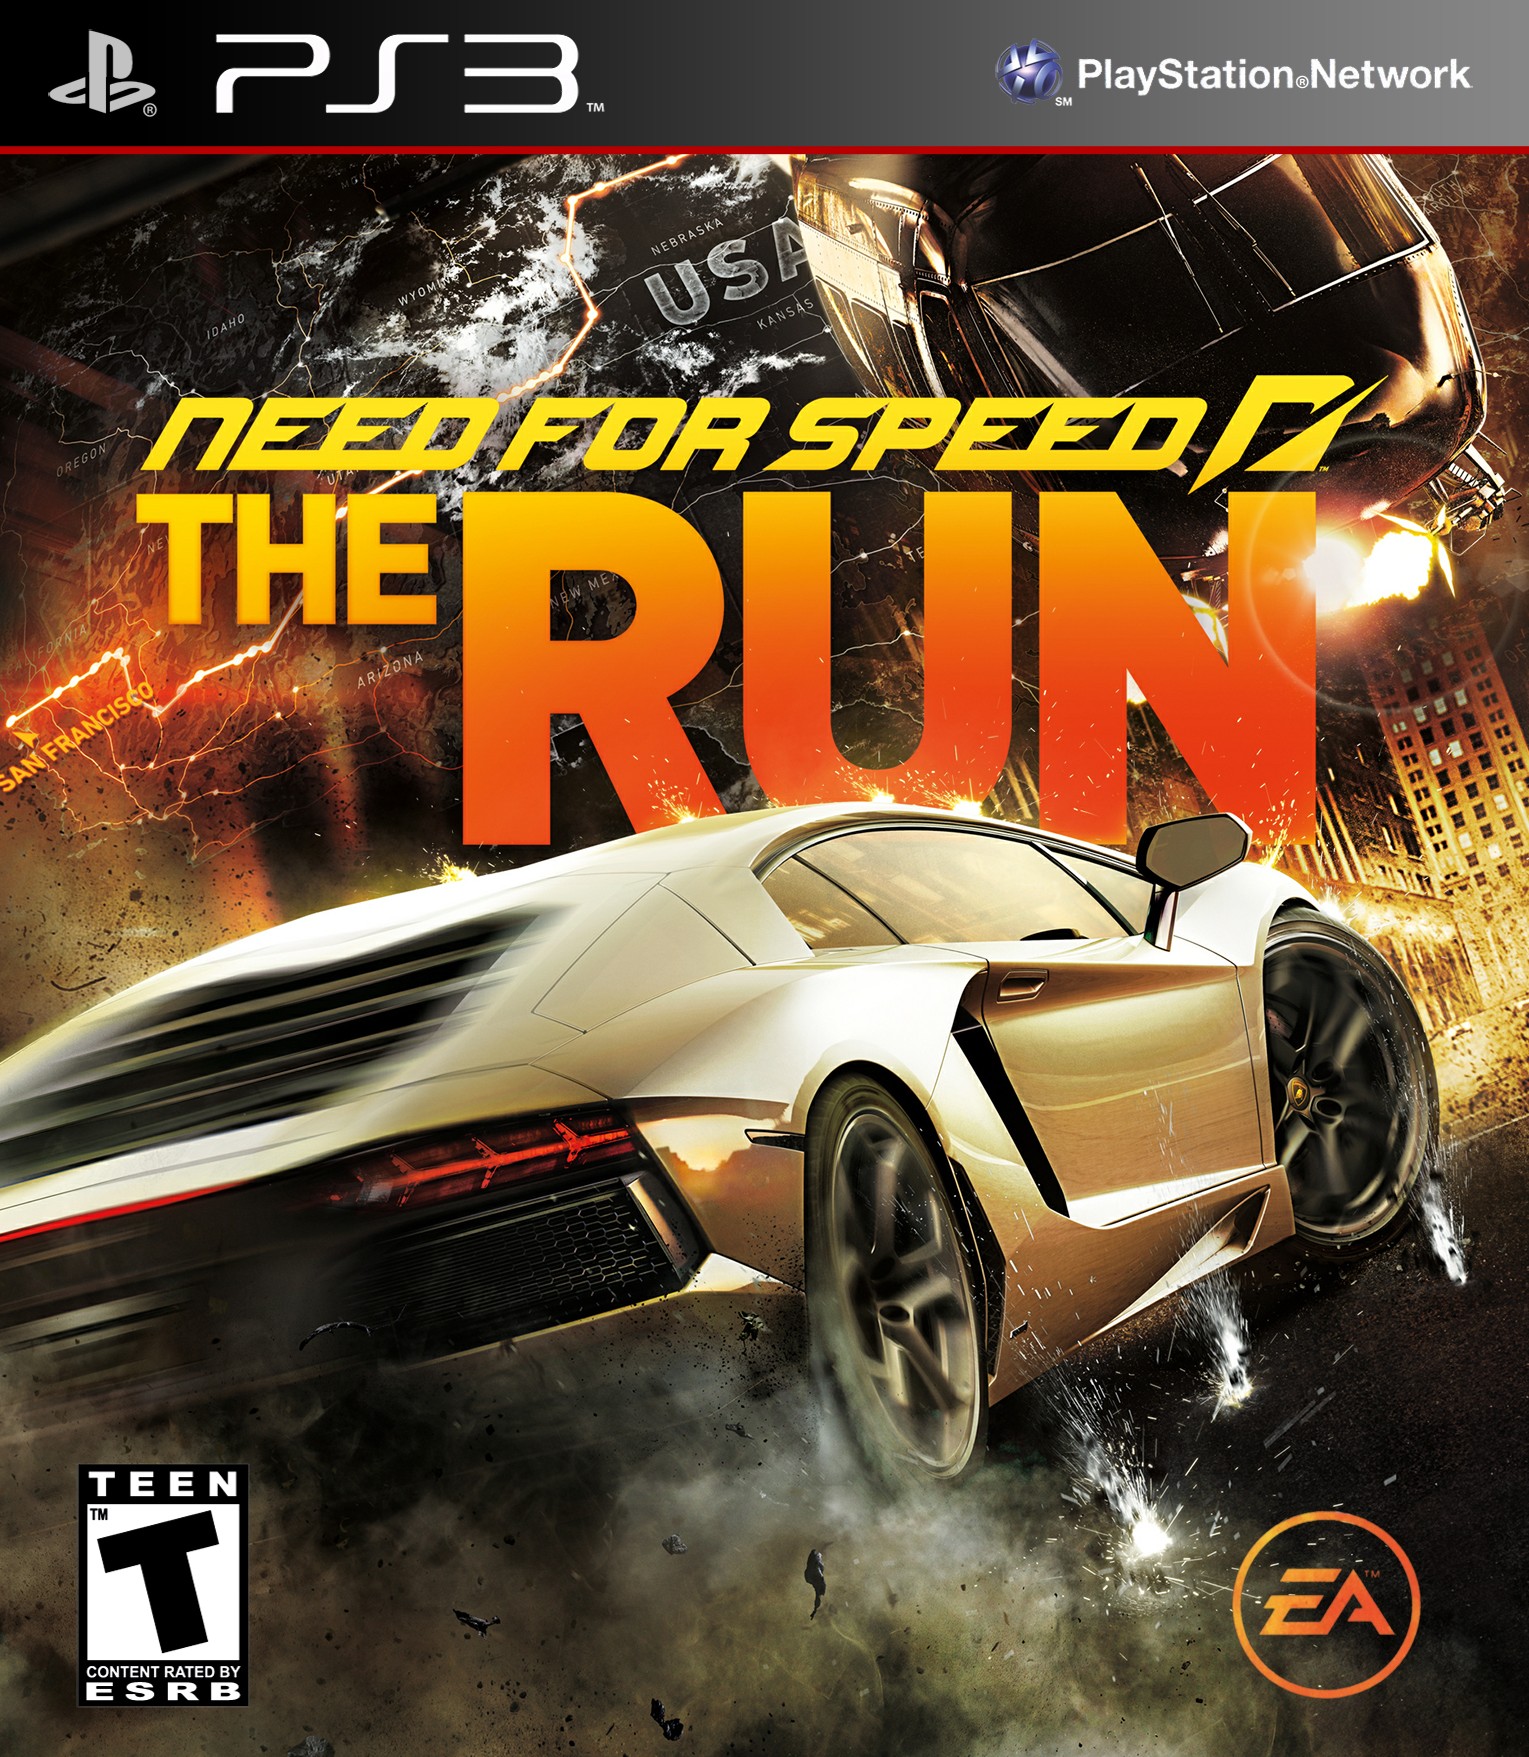 'Need for Speed: The Run'